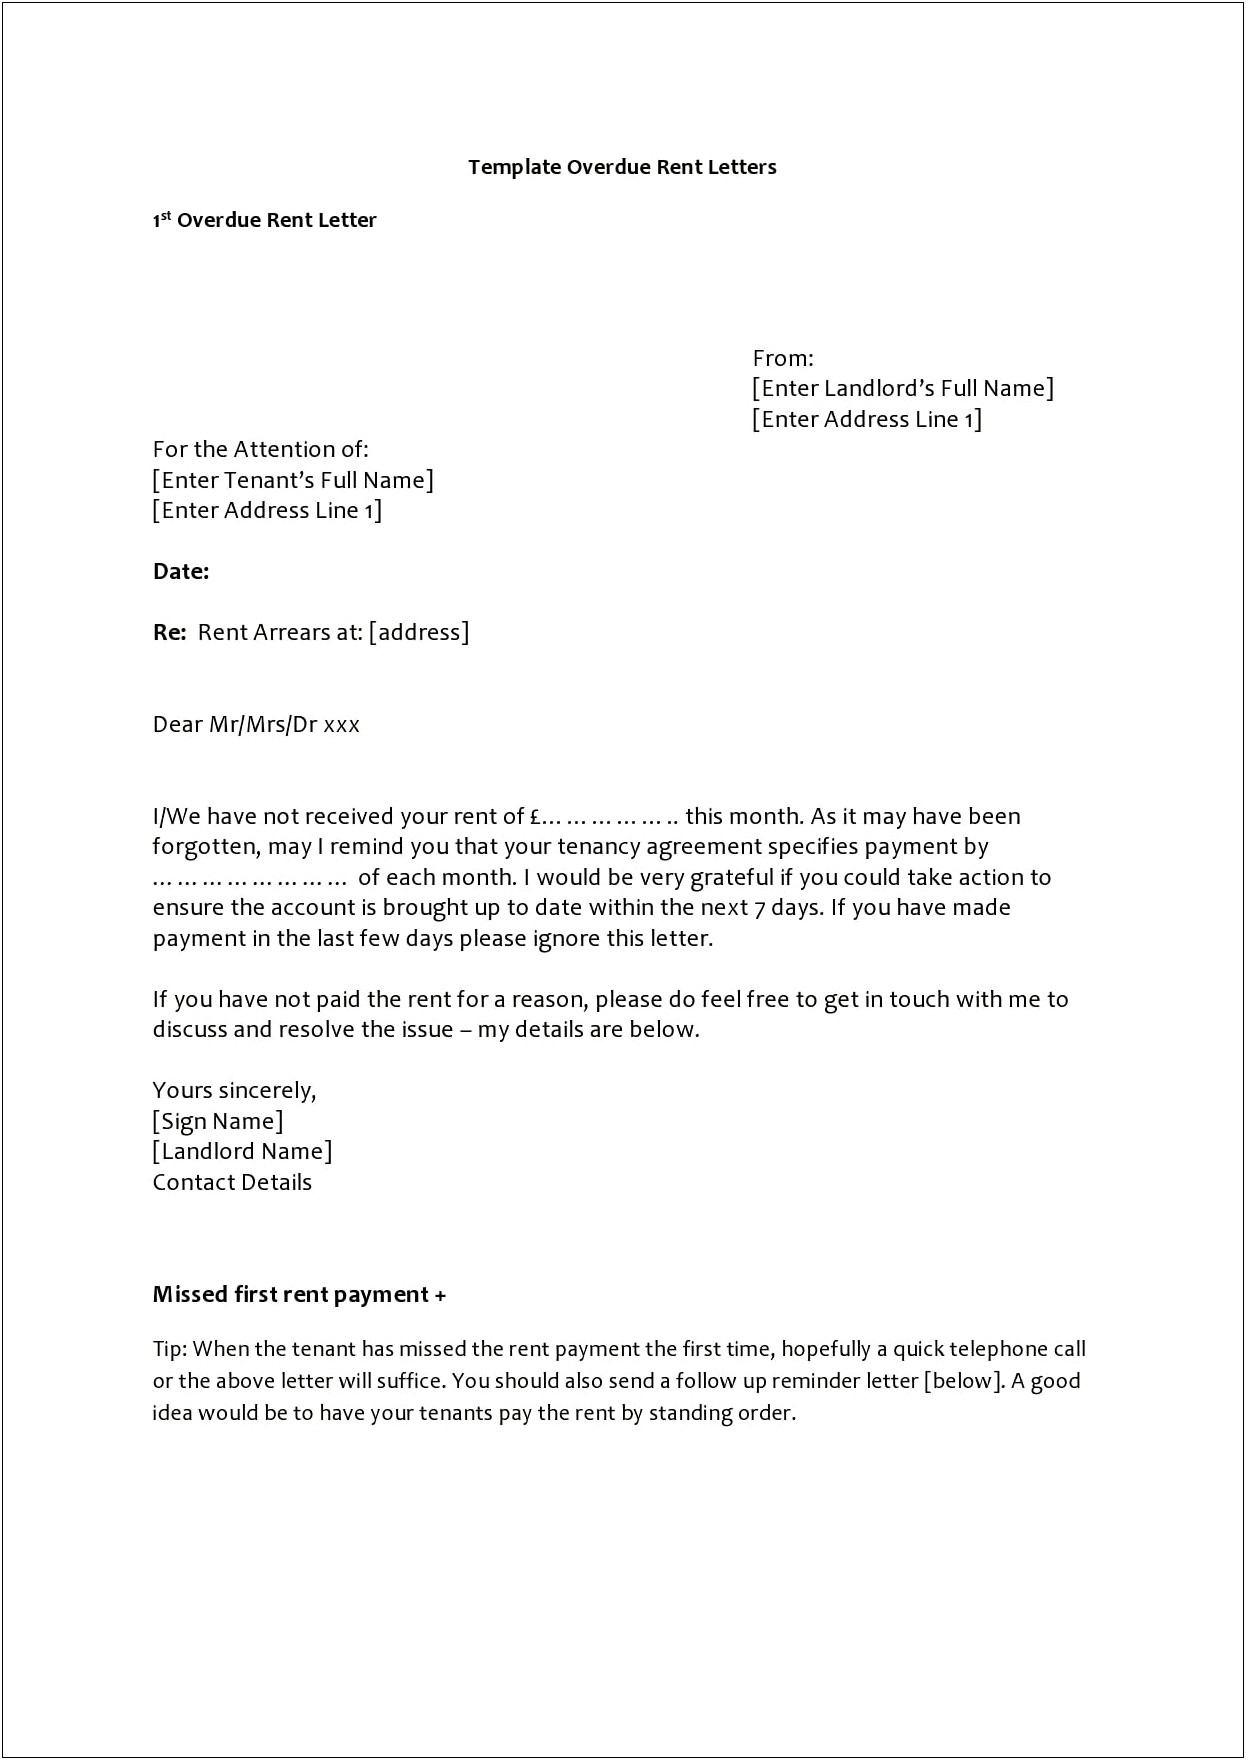 Final Reminder Letter For Outstanding Payment Template